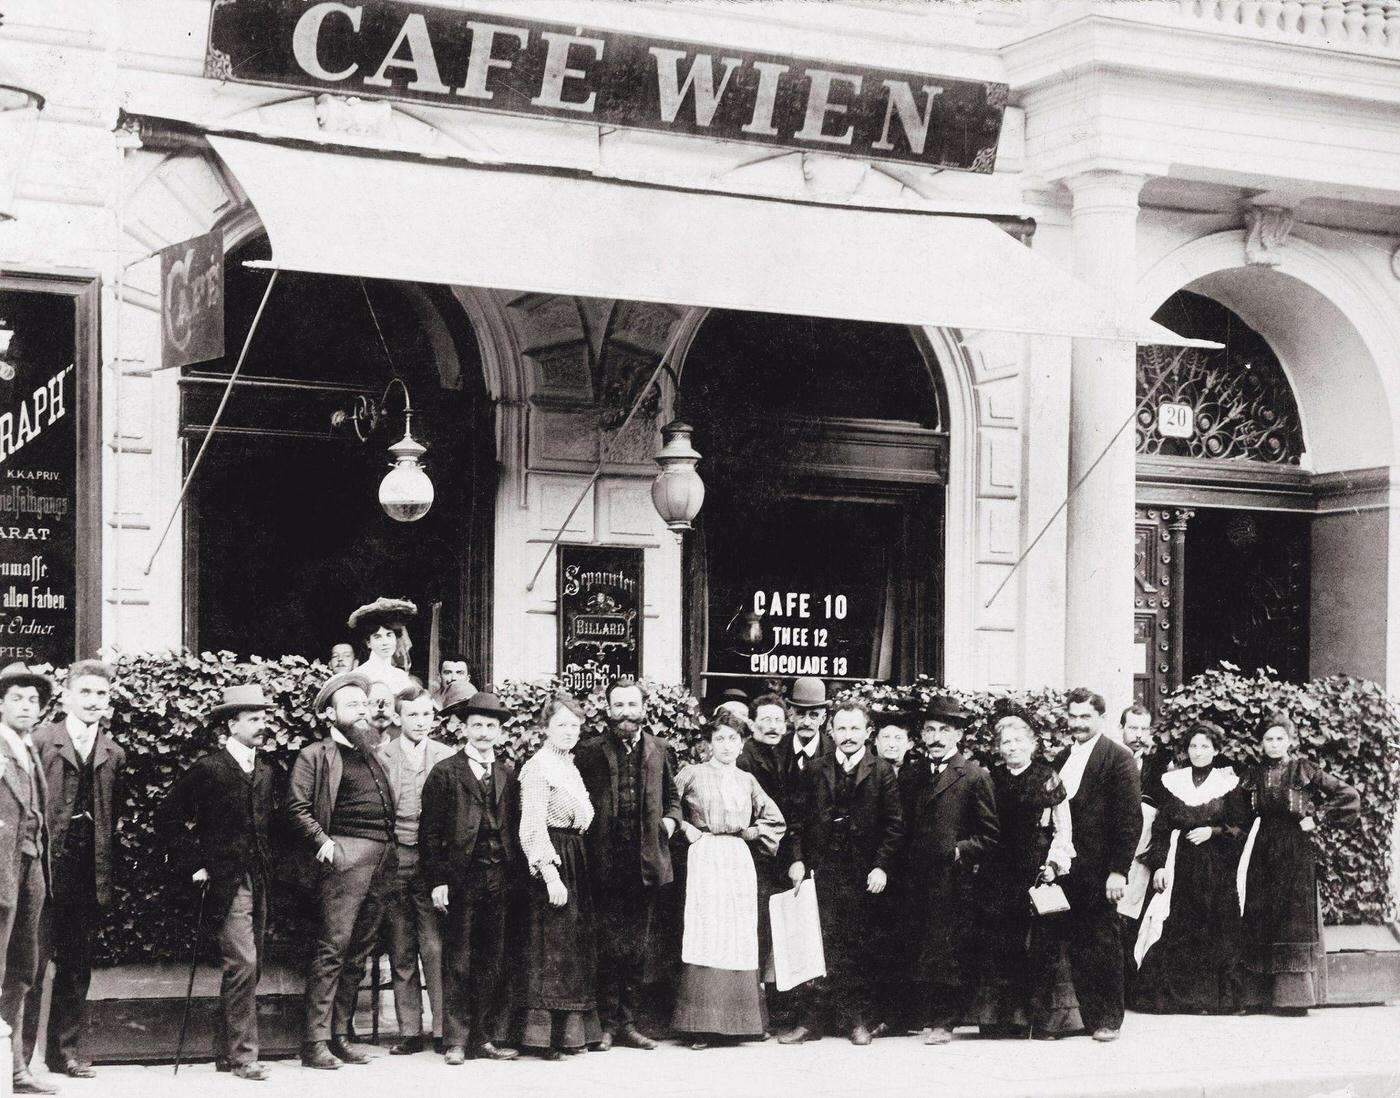 Groupportrait Of Staff And Guests, Cafe Wien, Austria, 1904